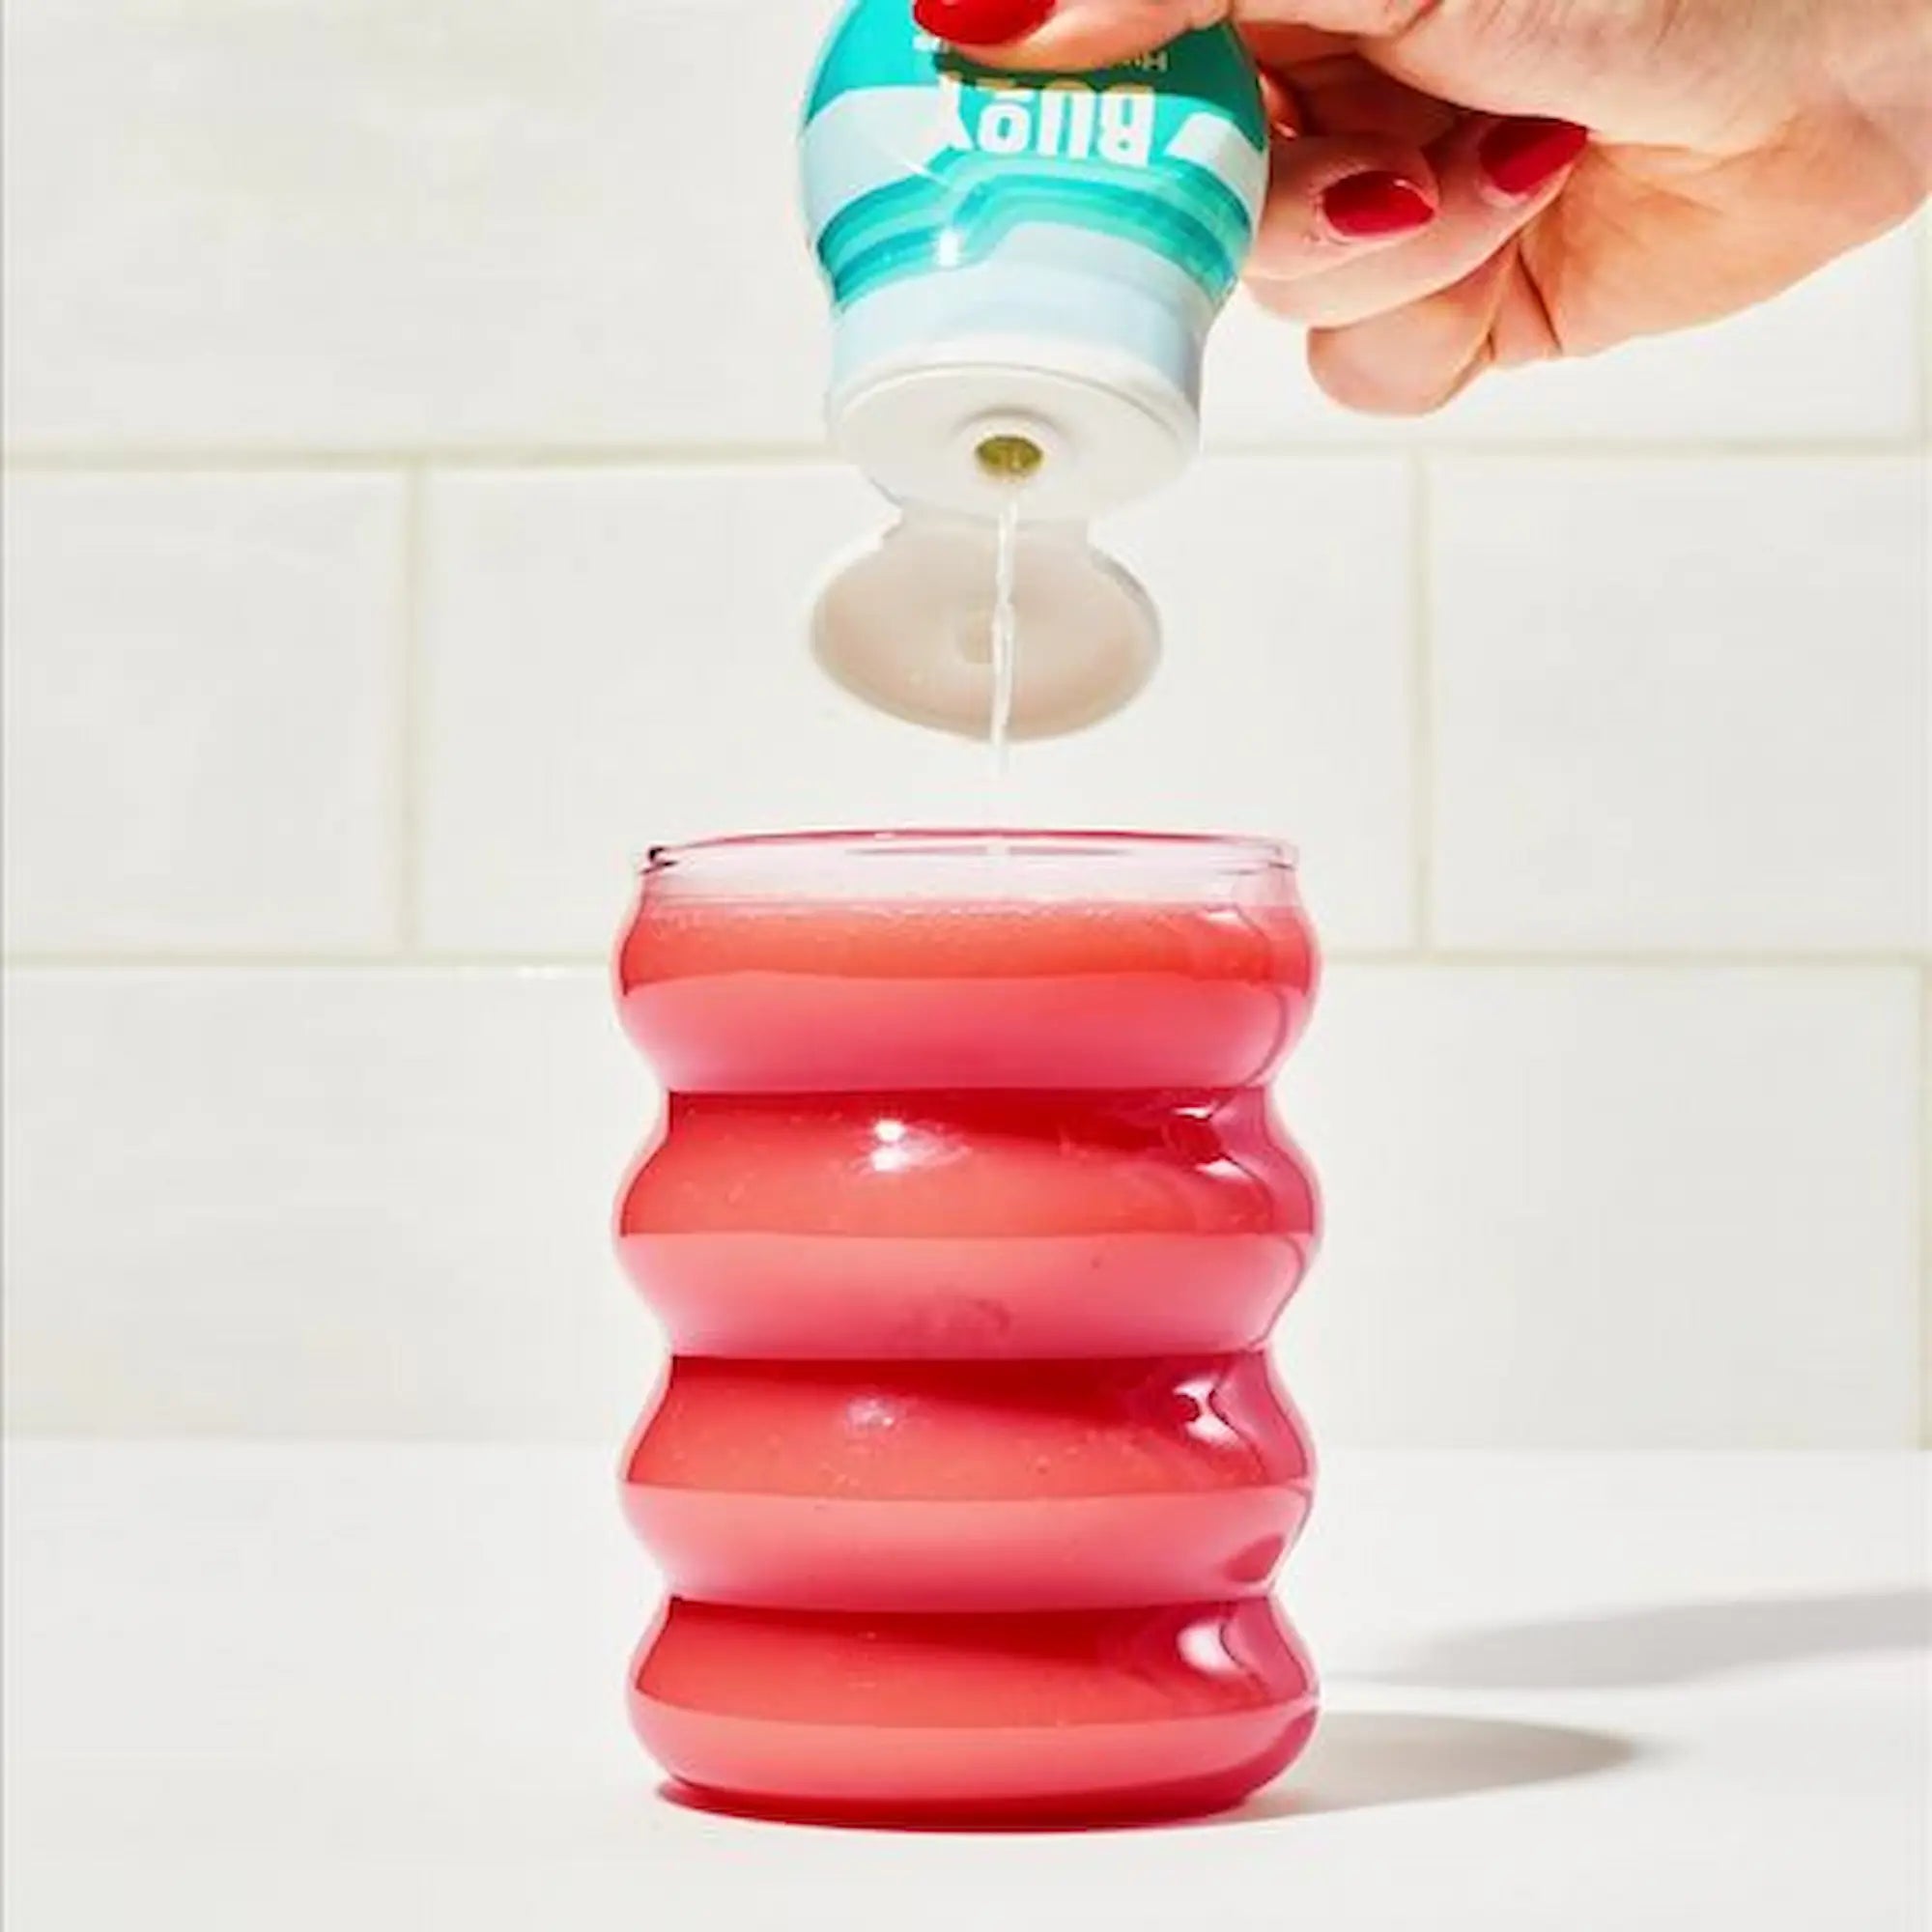 Squeezing Buoy hydration drops into a smoothie.